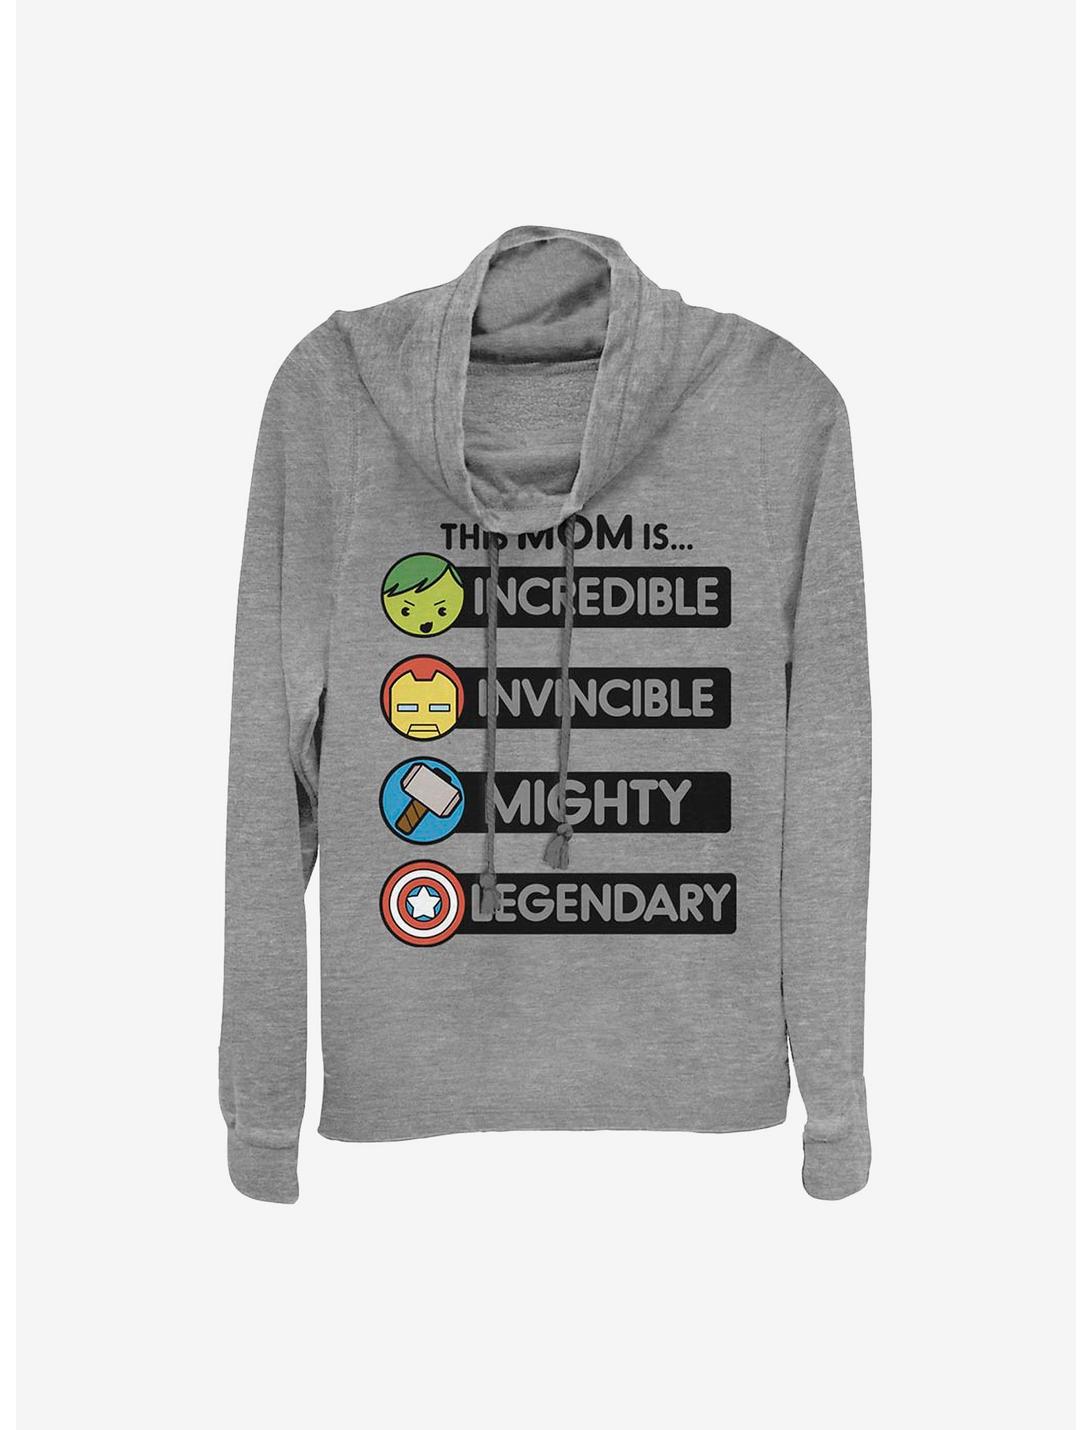 Marvel Avengers This Mom Is... Cowlneck Long-Sleeve Girls Top, GRAY HTR, hi-res